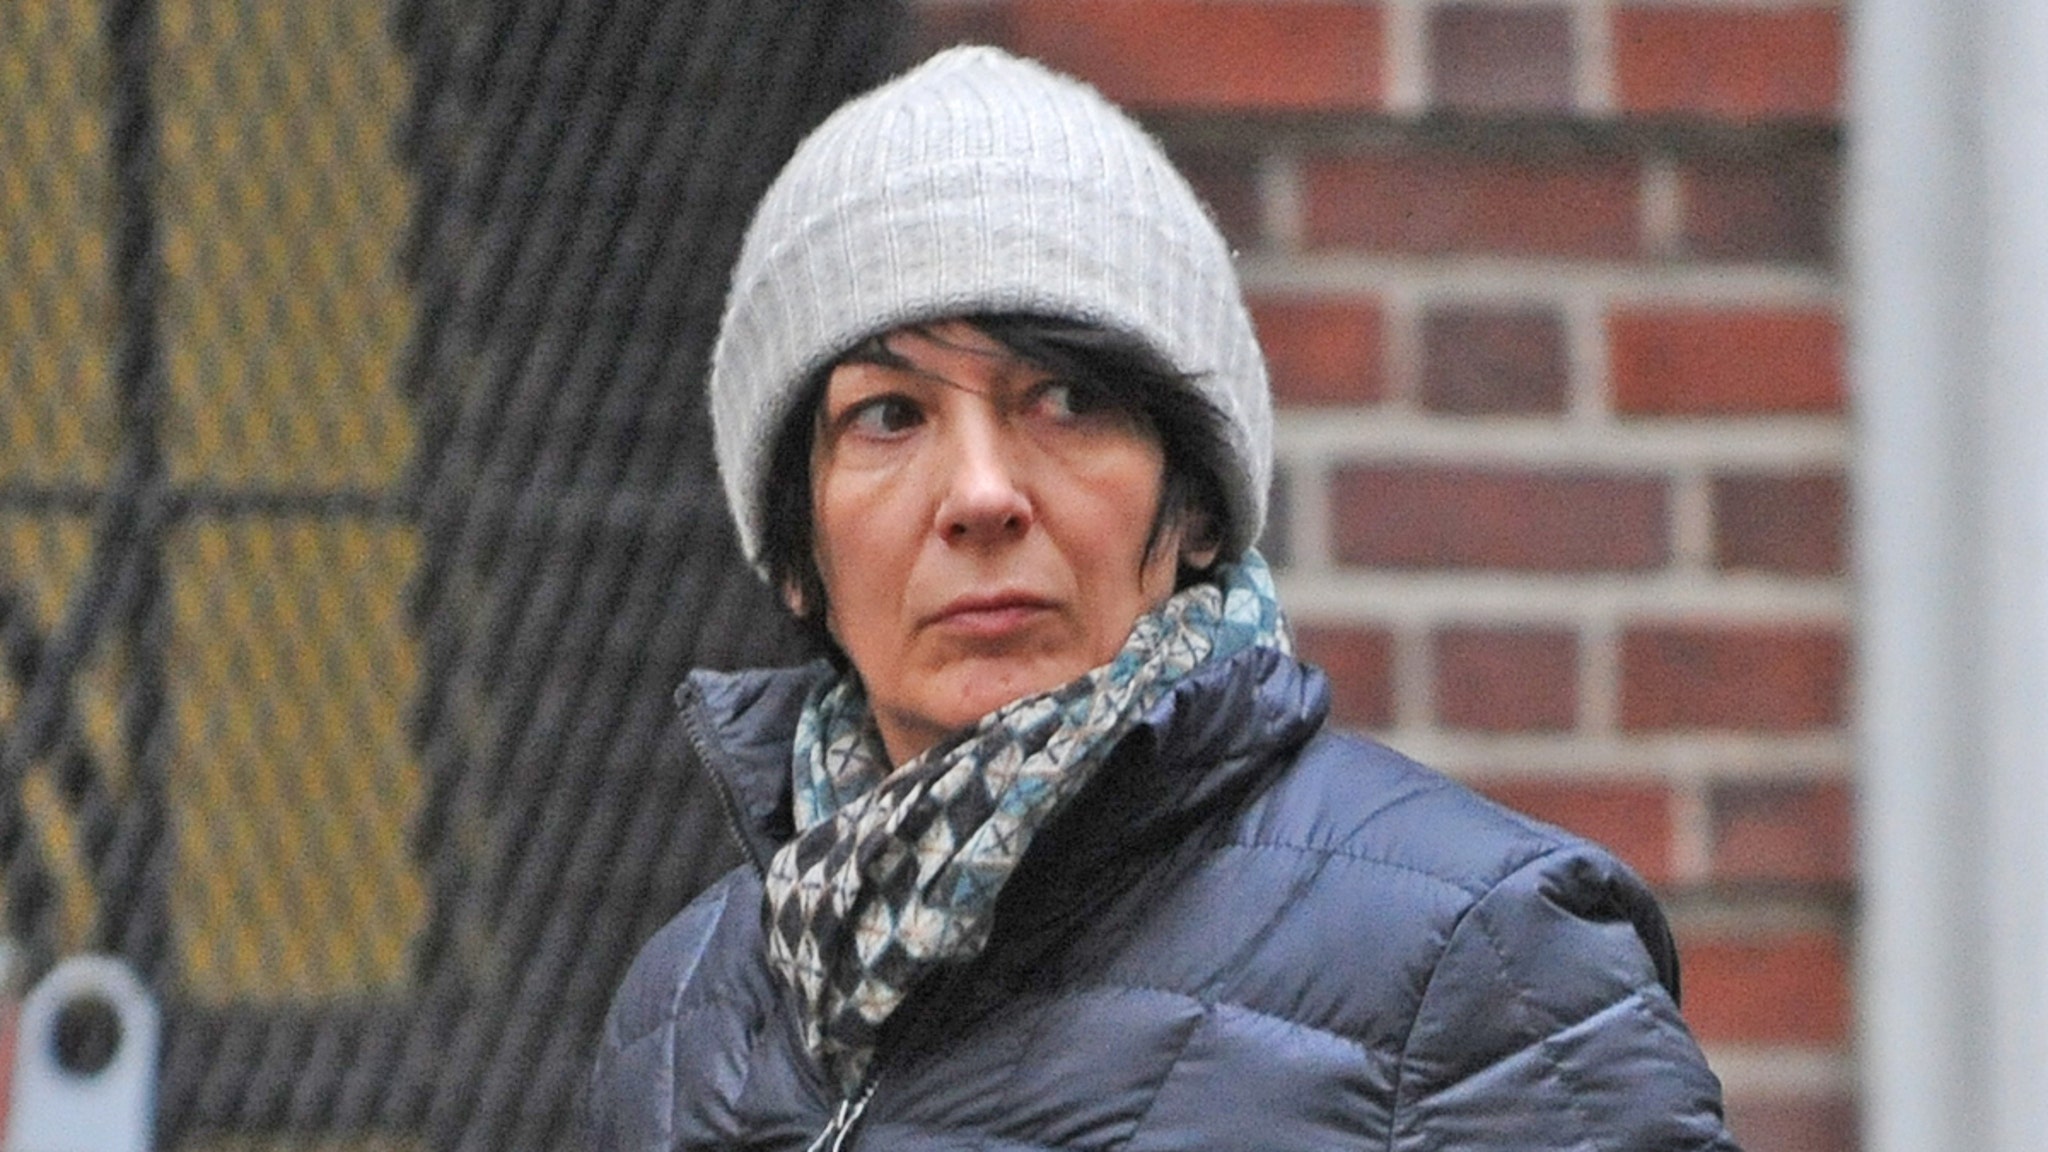 Ghislaine Maxwell Has to Stay Away from Kids Once She’s Out of Prison